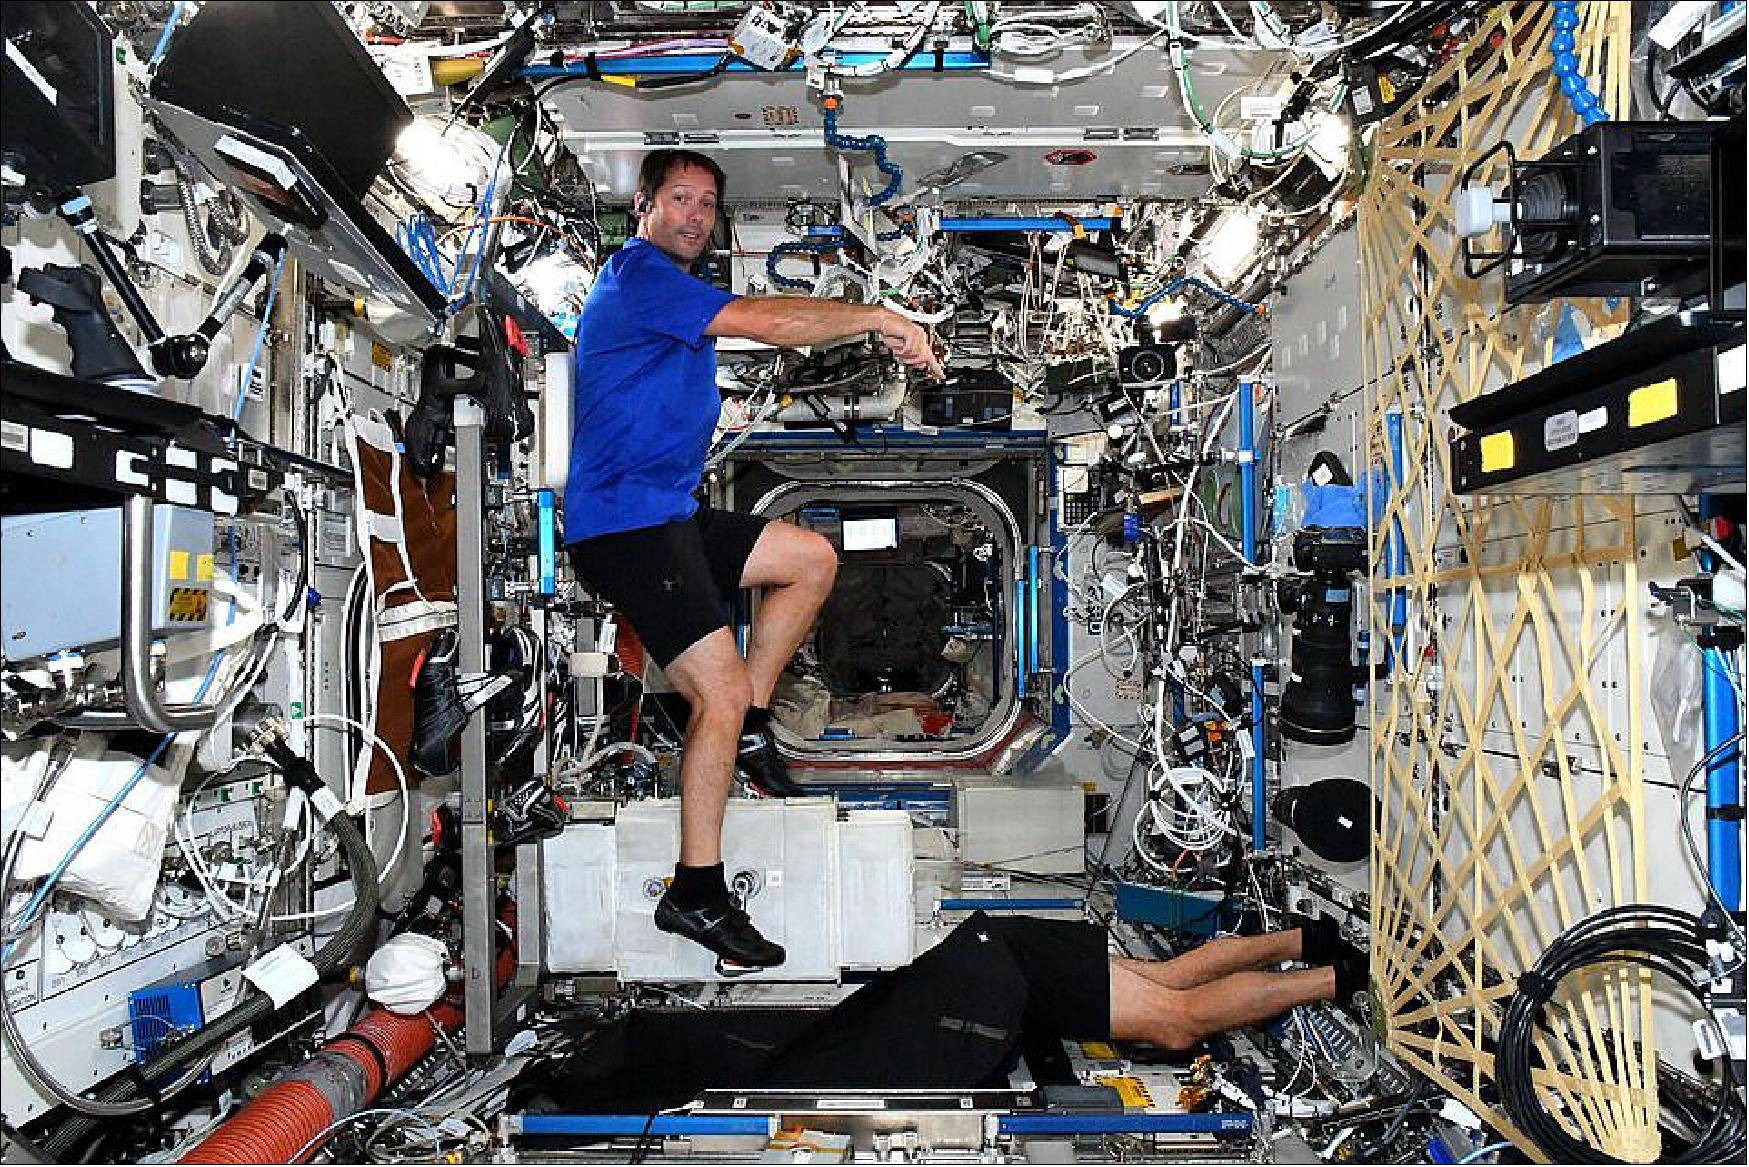 Figure 79: ESA astronaut Thomas Pesquet is here working out while his crew mate NASA astronaut, Shane Kimbrough, takes pictures of Earth. Thomas recently shared this image on his social media channels saying:"A typical view on the International Space Station's NASA Destiny laboratory. The legs sticking out are Shane's who was opening the shutters to admire the view after an exercise session. The window he is looking out looks straight down at Earth and when we fly over Europe it is often my legs sticking out :)" (image credit: JAXA/NASA–A. Hoshide)